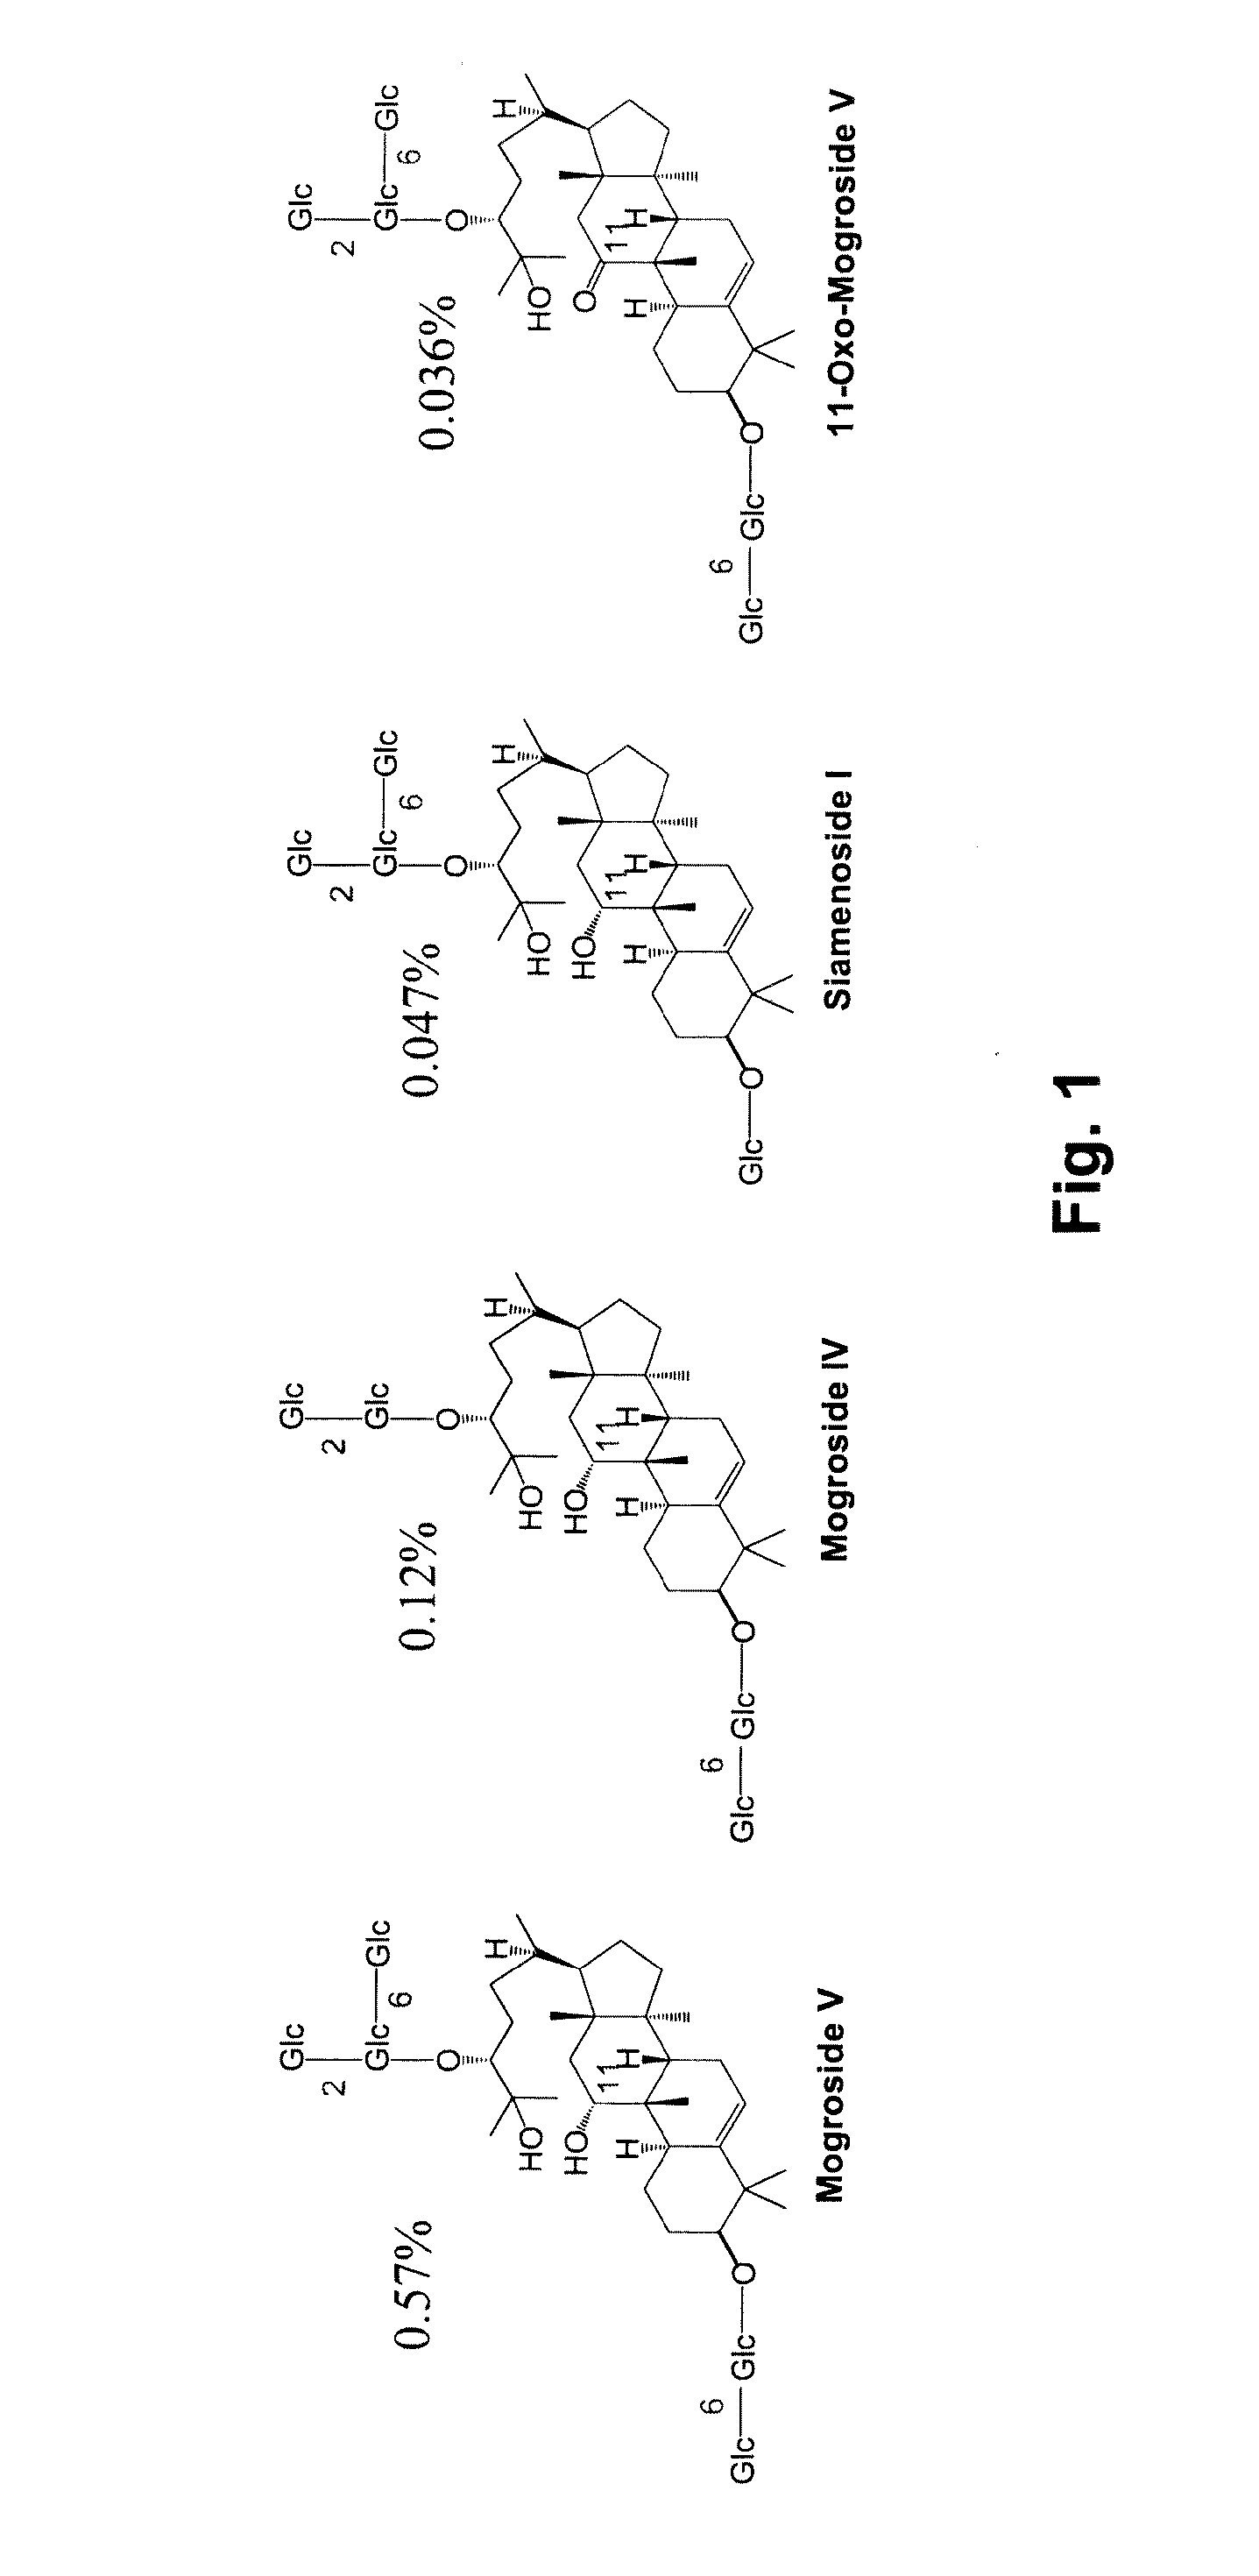 Methods and materials for Biosynthesis of Mogroside Compounds